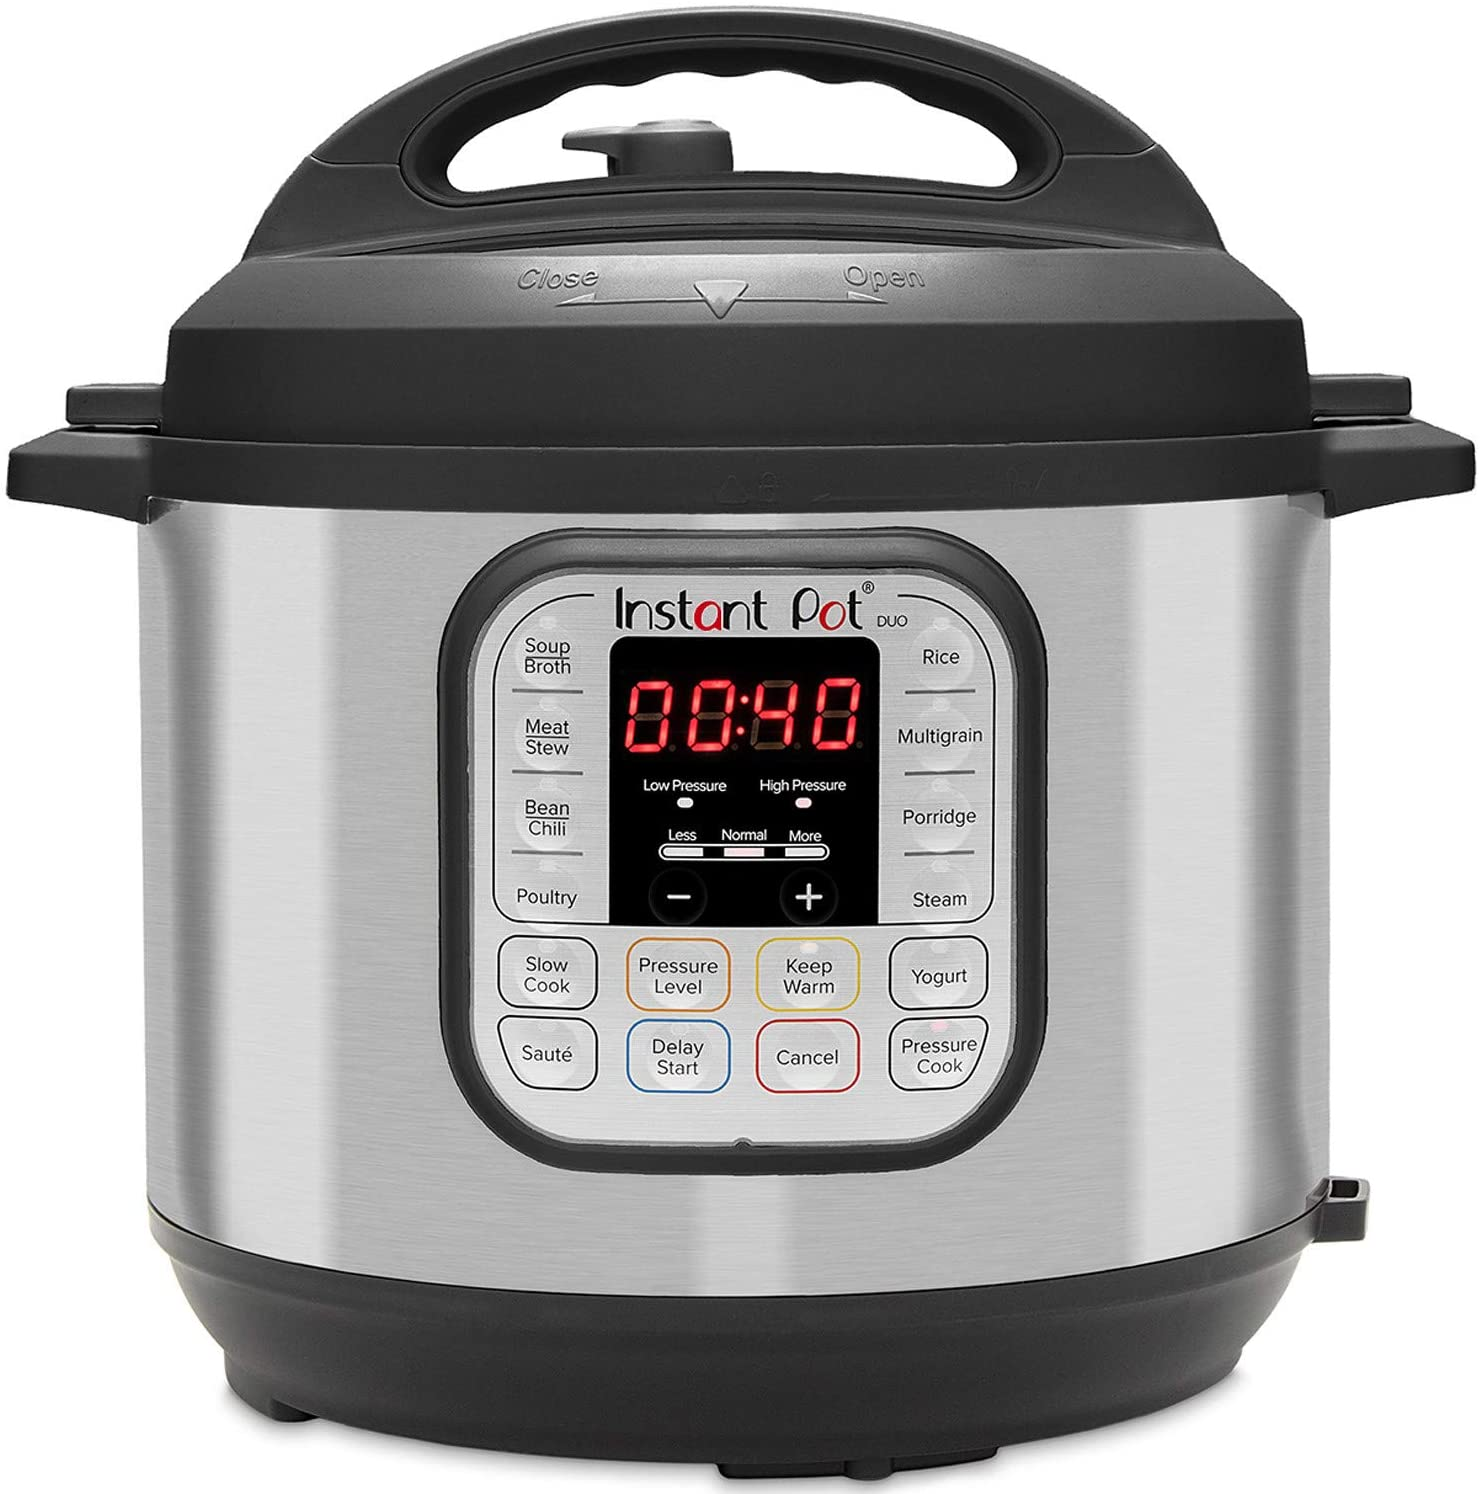 Instant Pot Duo 7-in-1 Electric Pressure Cooker, Sterilizer, Slow Cooker, Rice Cooker, Steamer, Saute, Yogurt Maker, and Warmer, 6 Quart, 14 One-Touch Programs